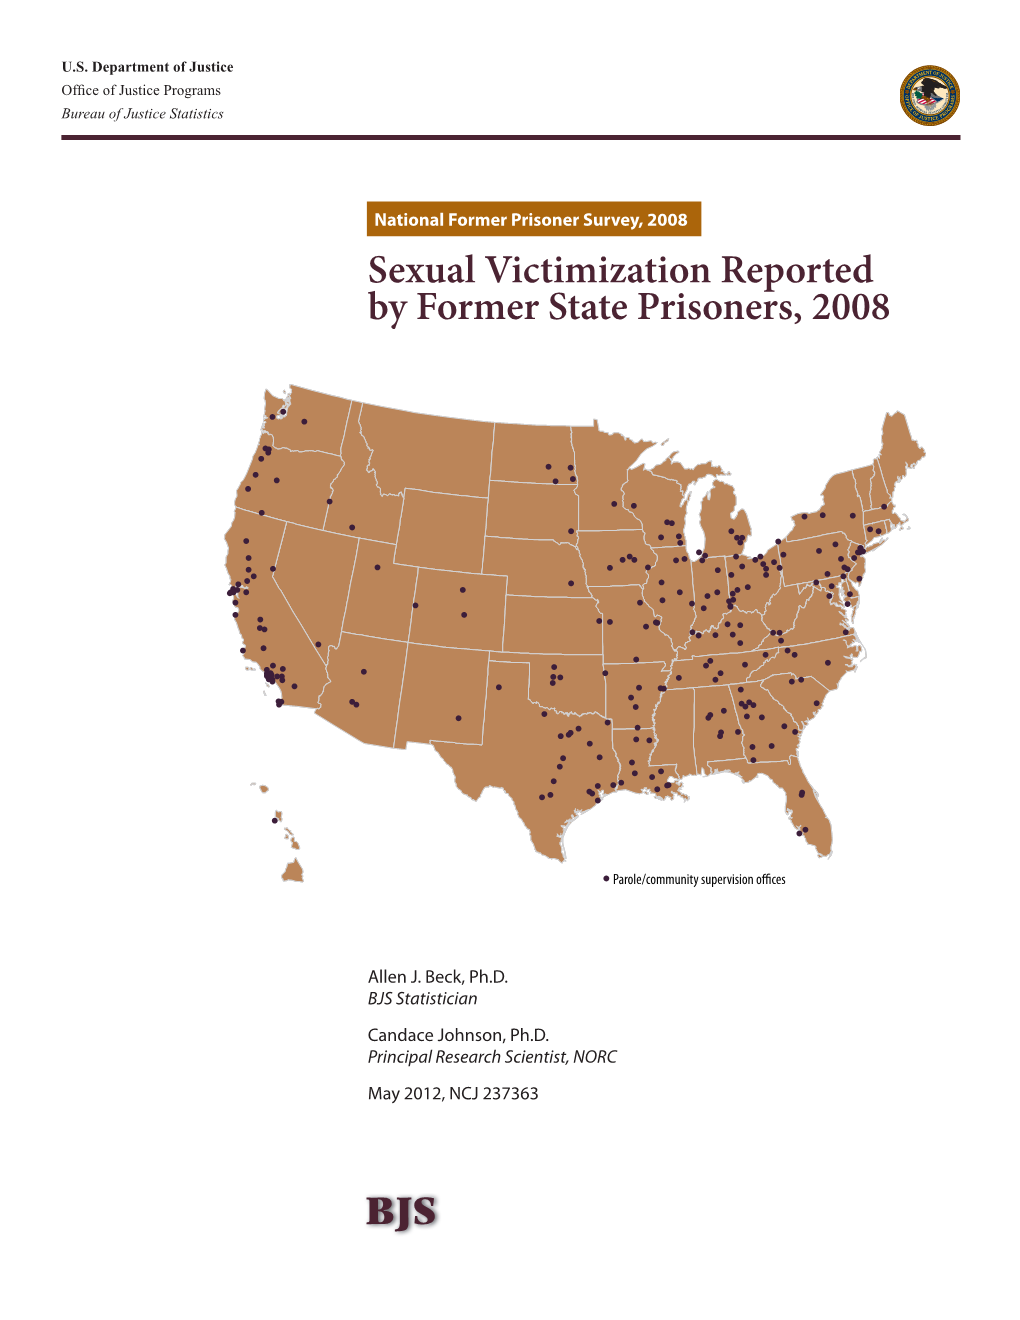 Sexual Victimization Reported by Former State Prisoners, 2008